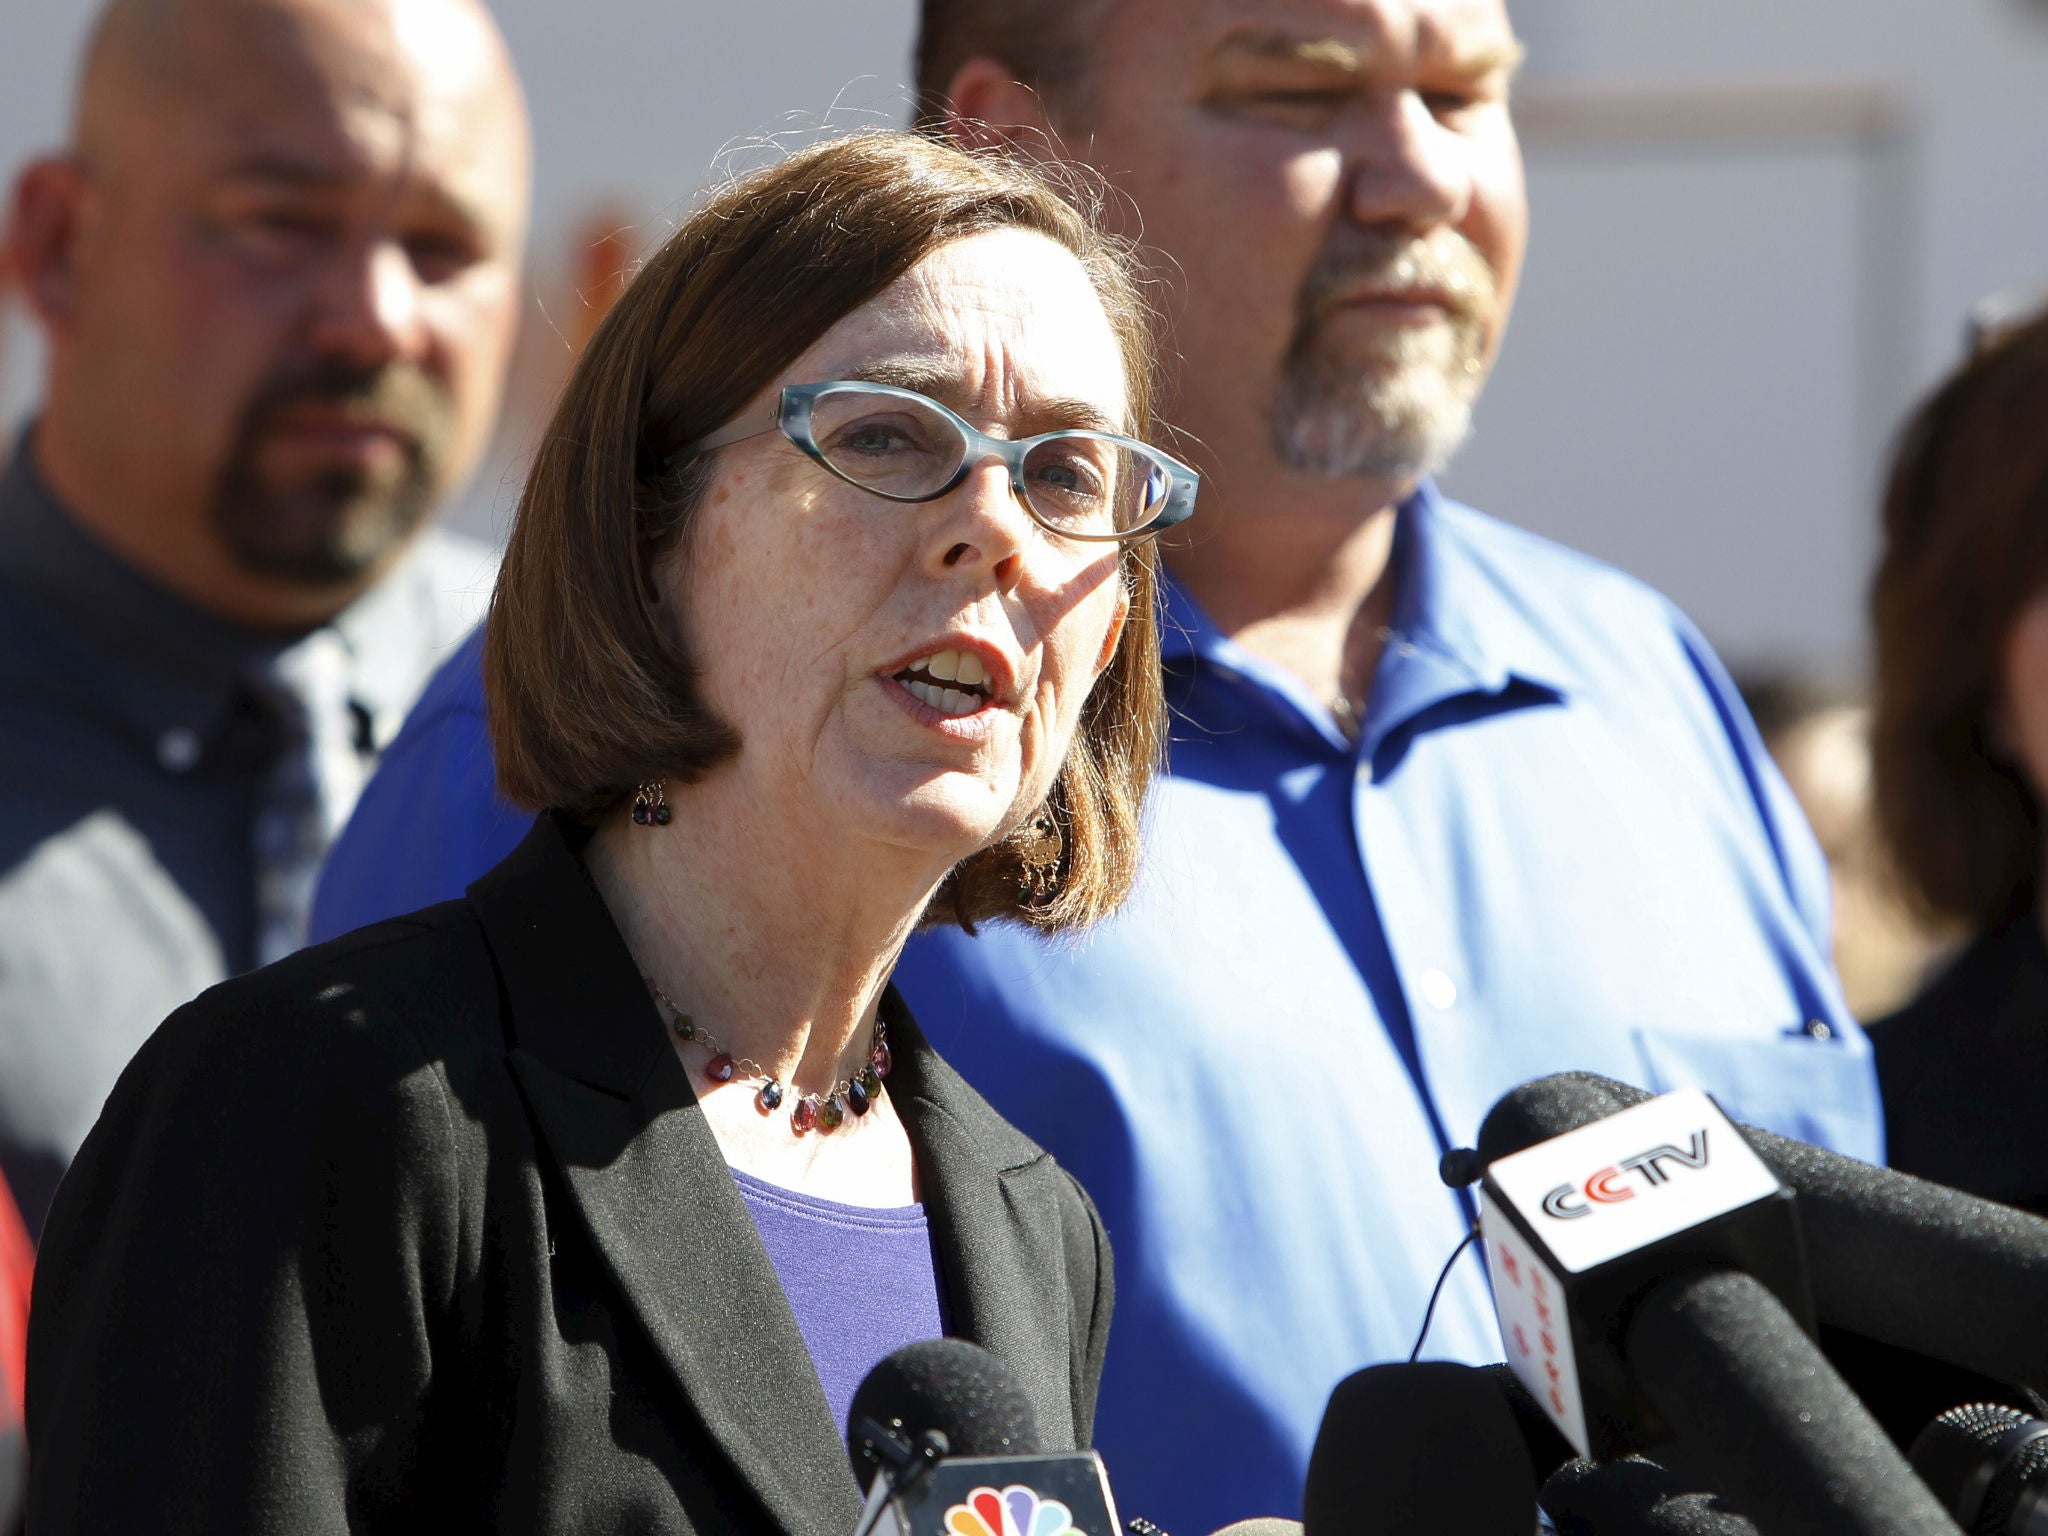 Oregon Governor Kate Brown used the bill signing to press Congress for federal gun safety legislation